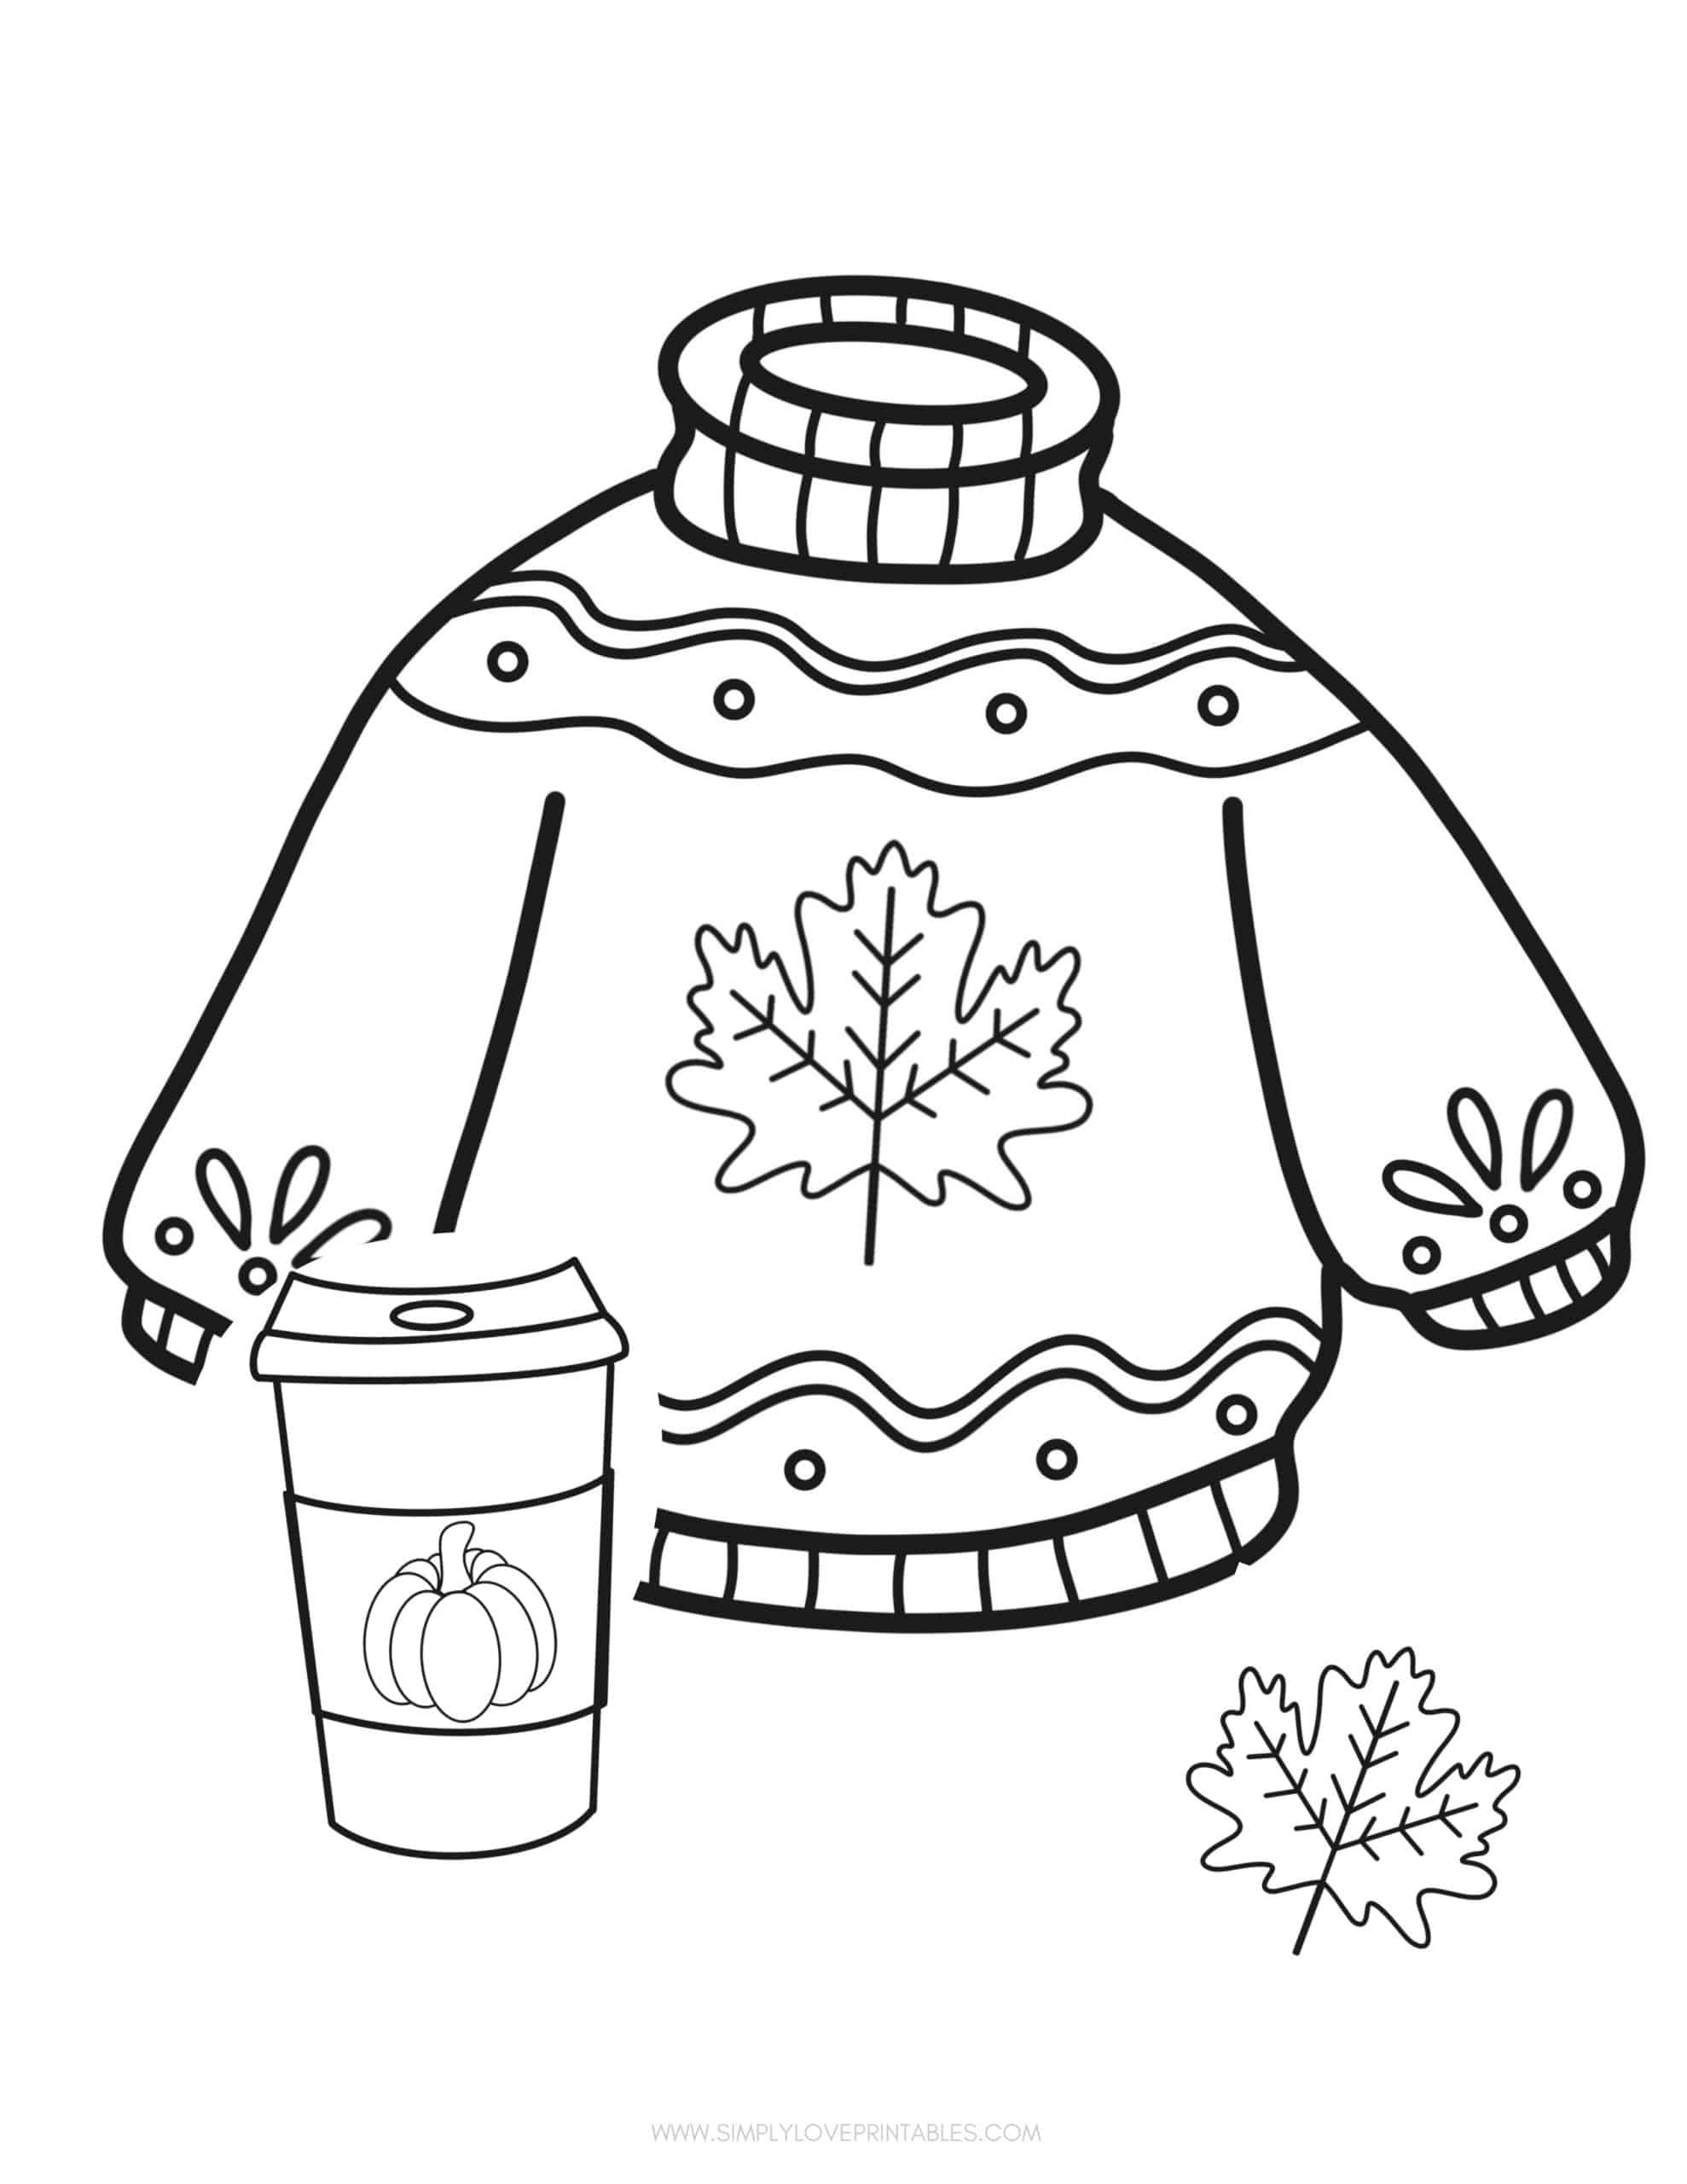 Free printable fall coloring pages simply love printables